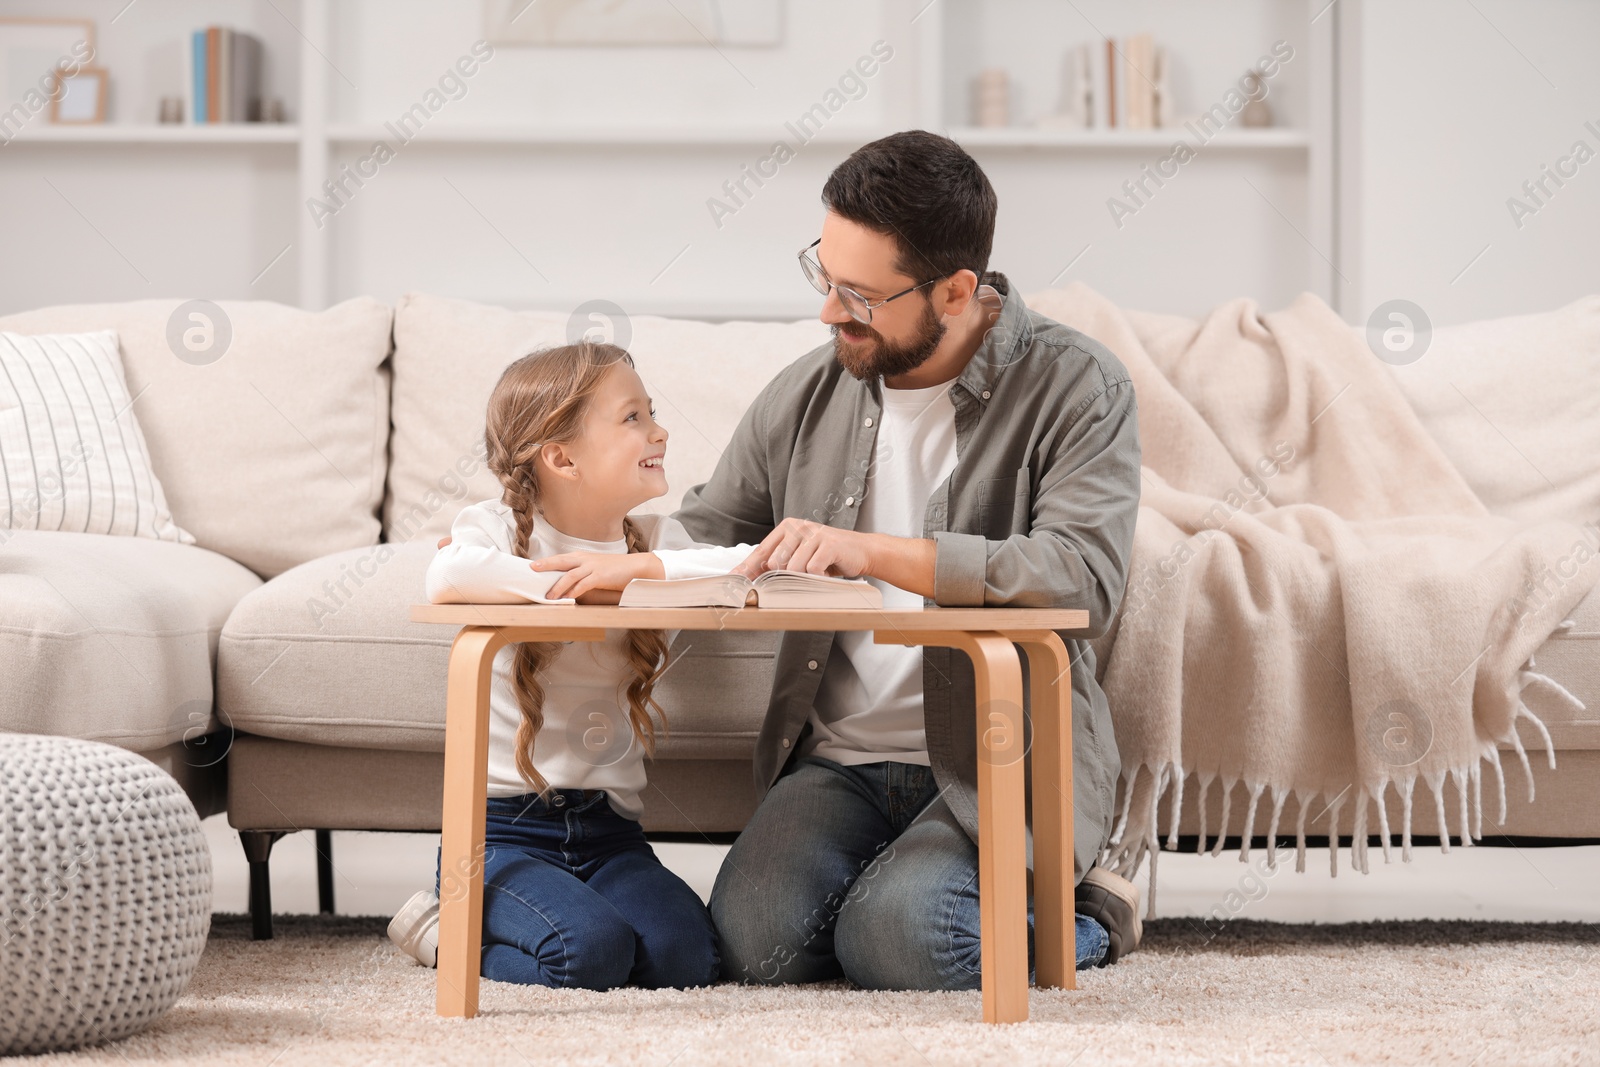 Photo of Girl and her godparent reading Bible together at table in room